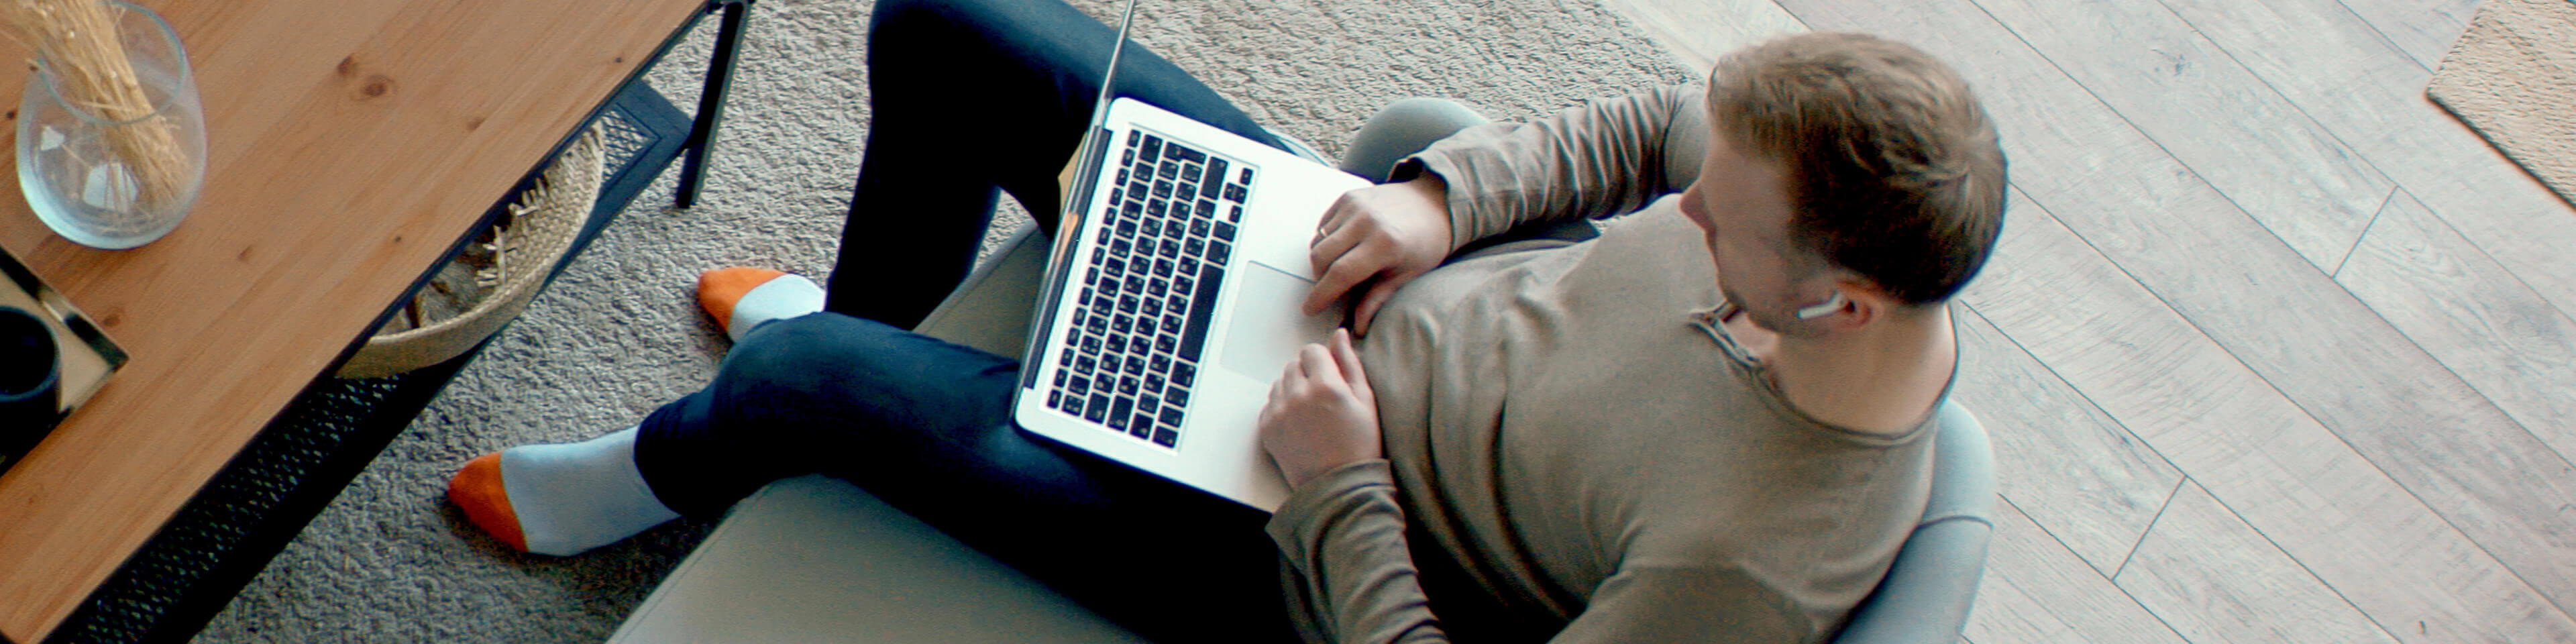 woman typing on a laptop; hands close-up